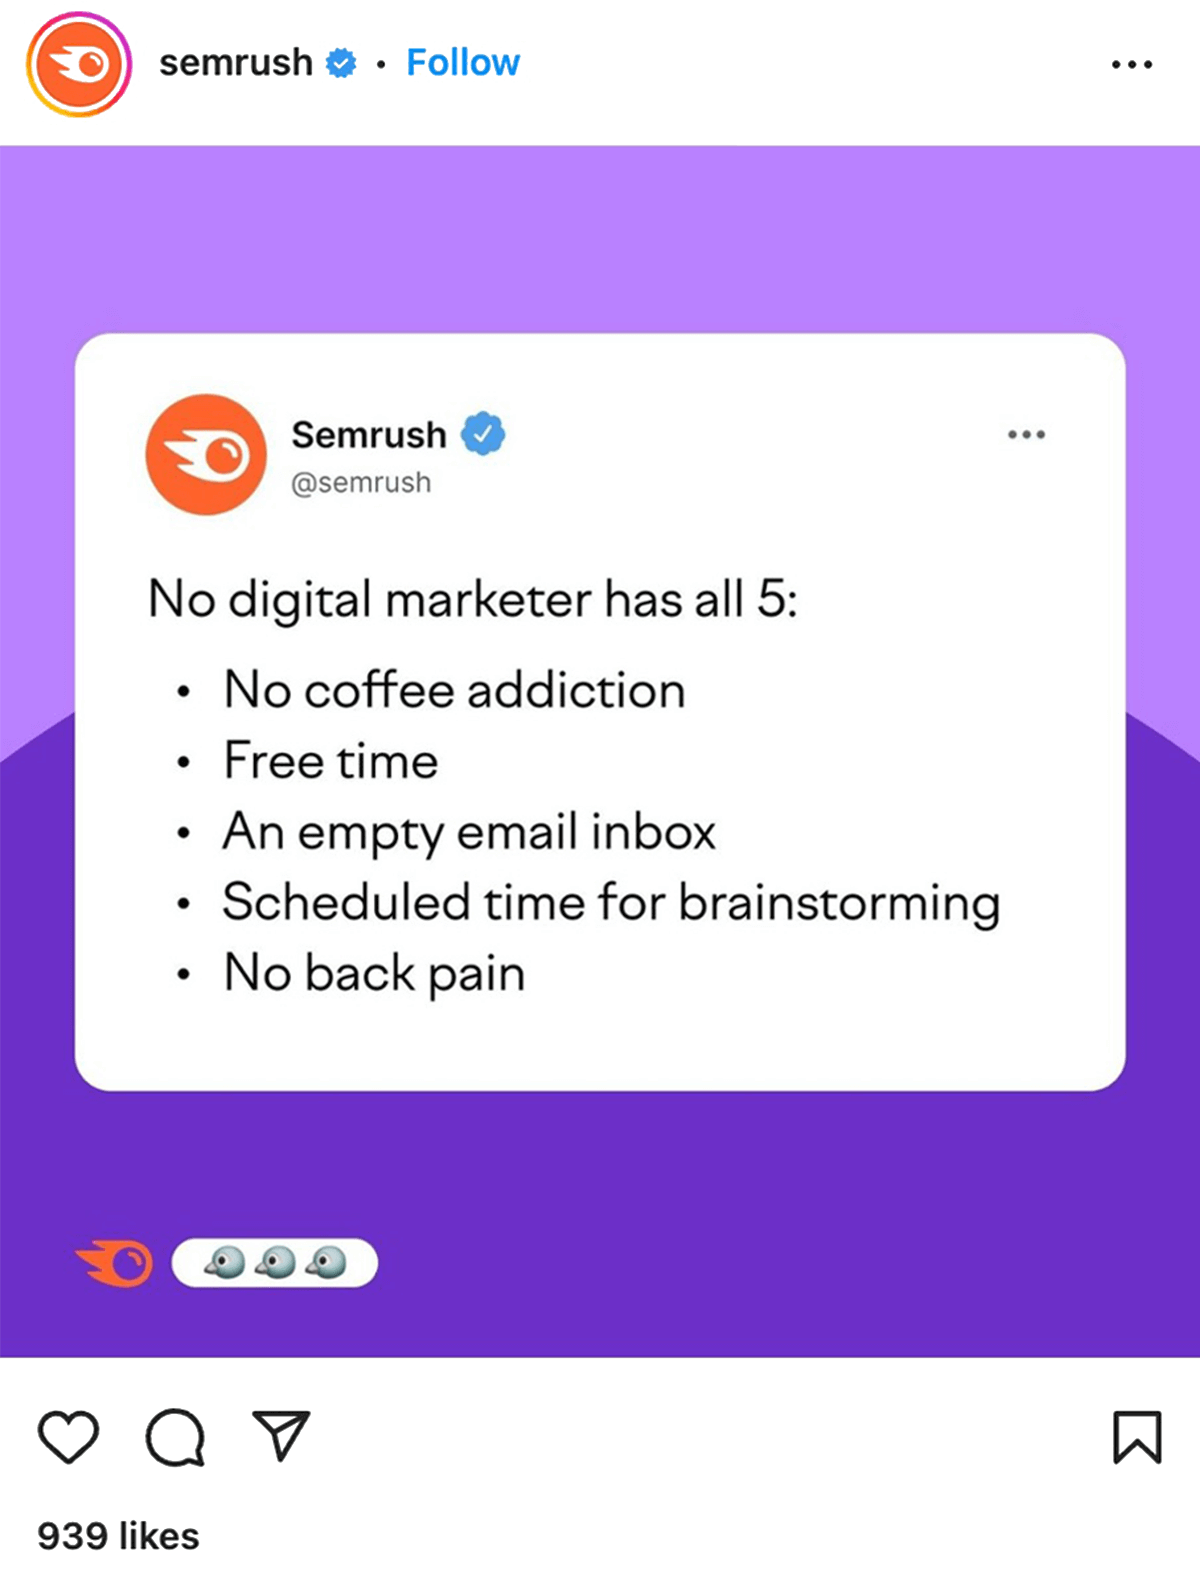 @semrush on Instagram: No digital marketer has all 5: no coffee addiction, free time, an empty email inbox, scheduled time for brainstorming, no back pain